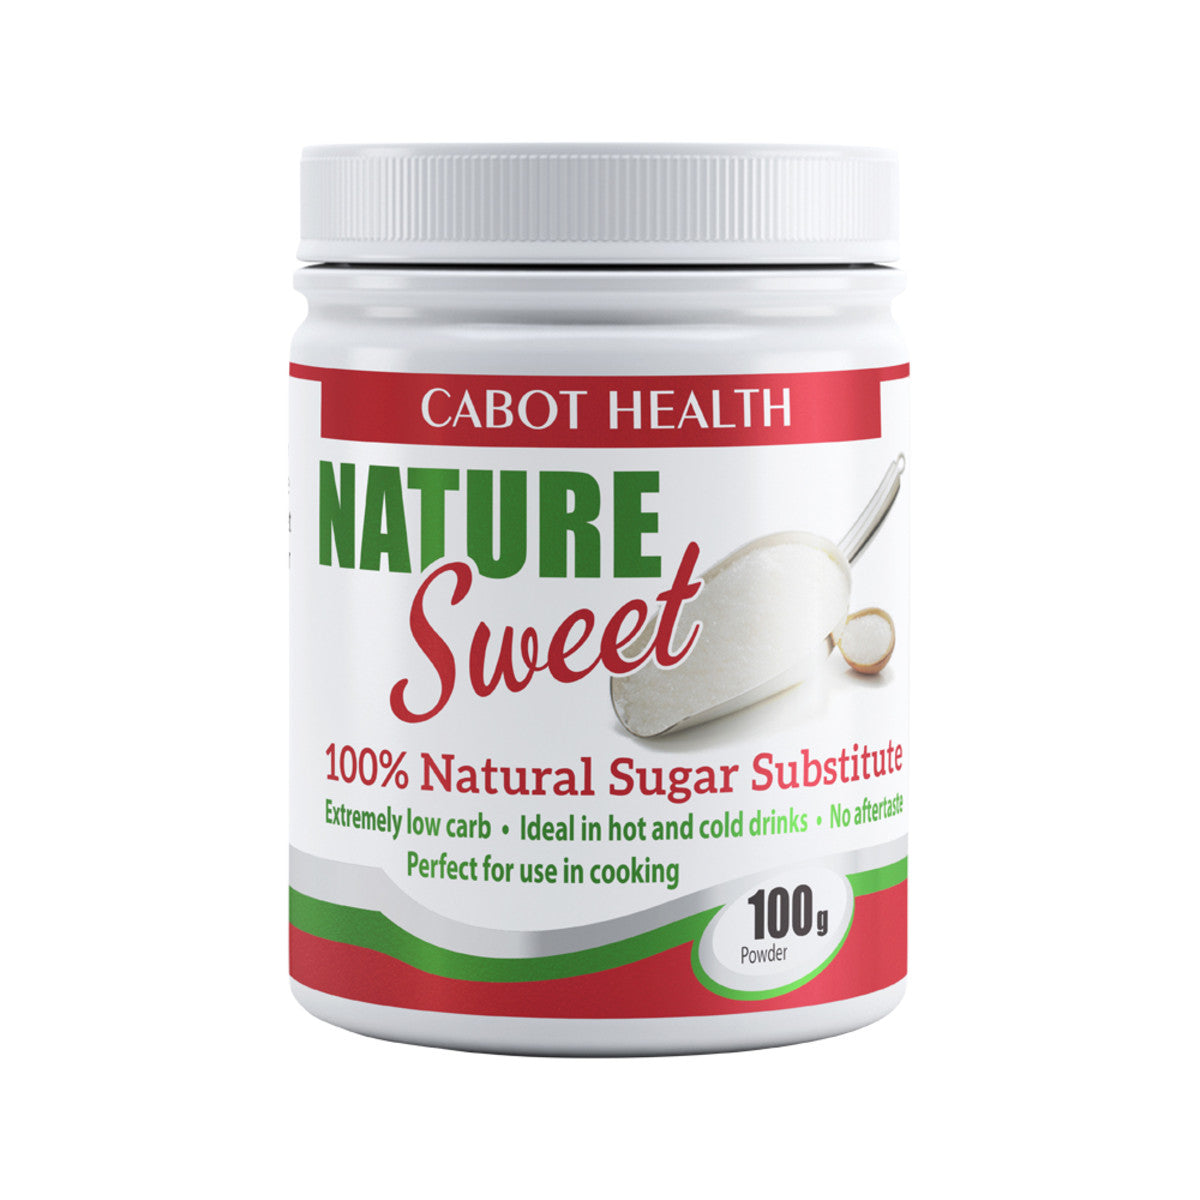 Cabot Health - Nature Sweet (Natural Sugar Substitute)